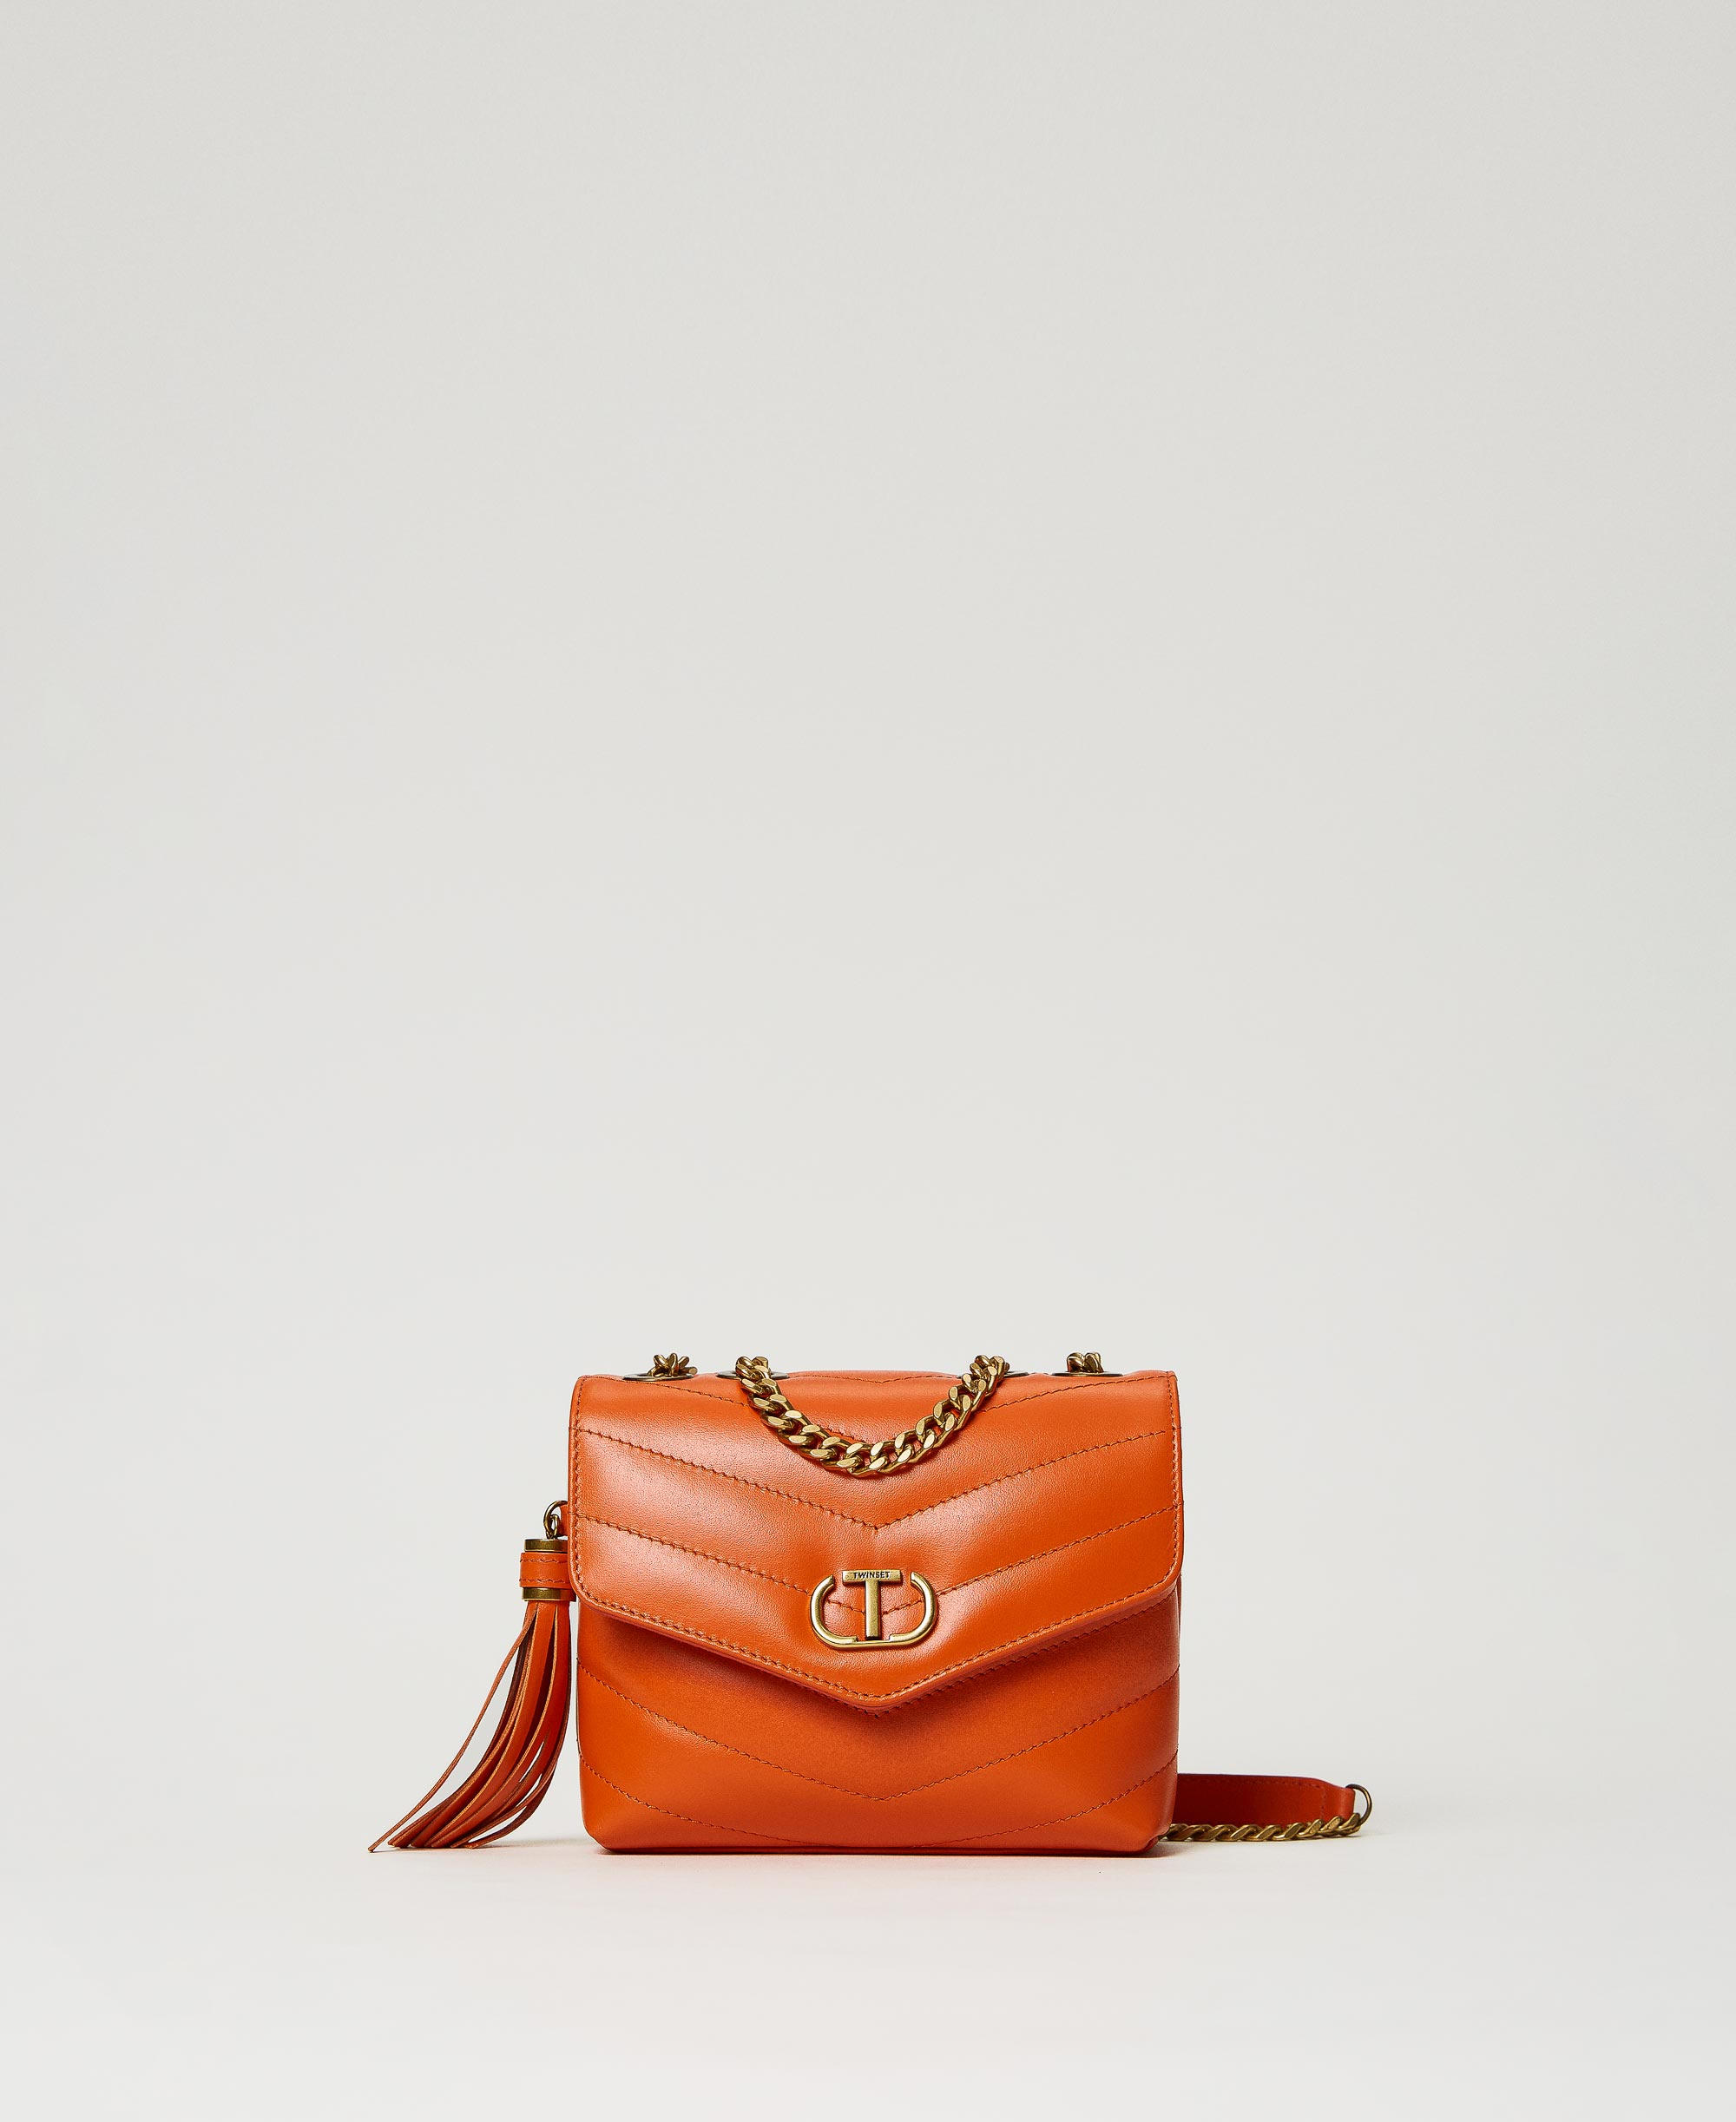 'Dreamy' small leather shoulder bag